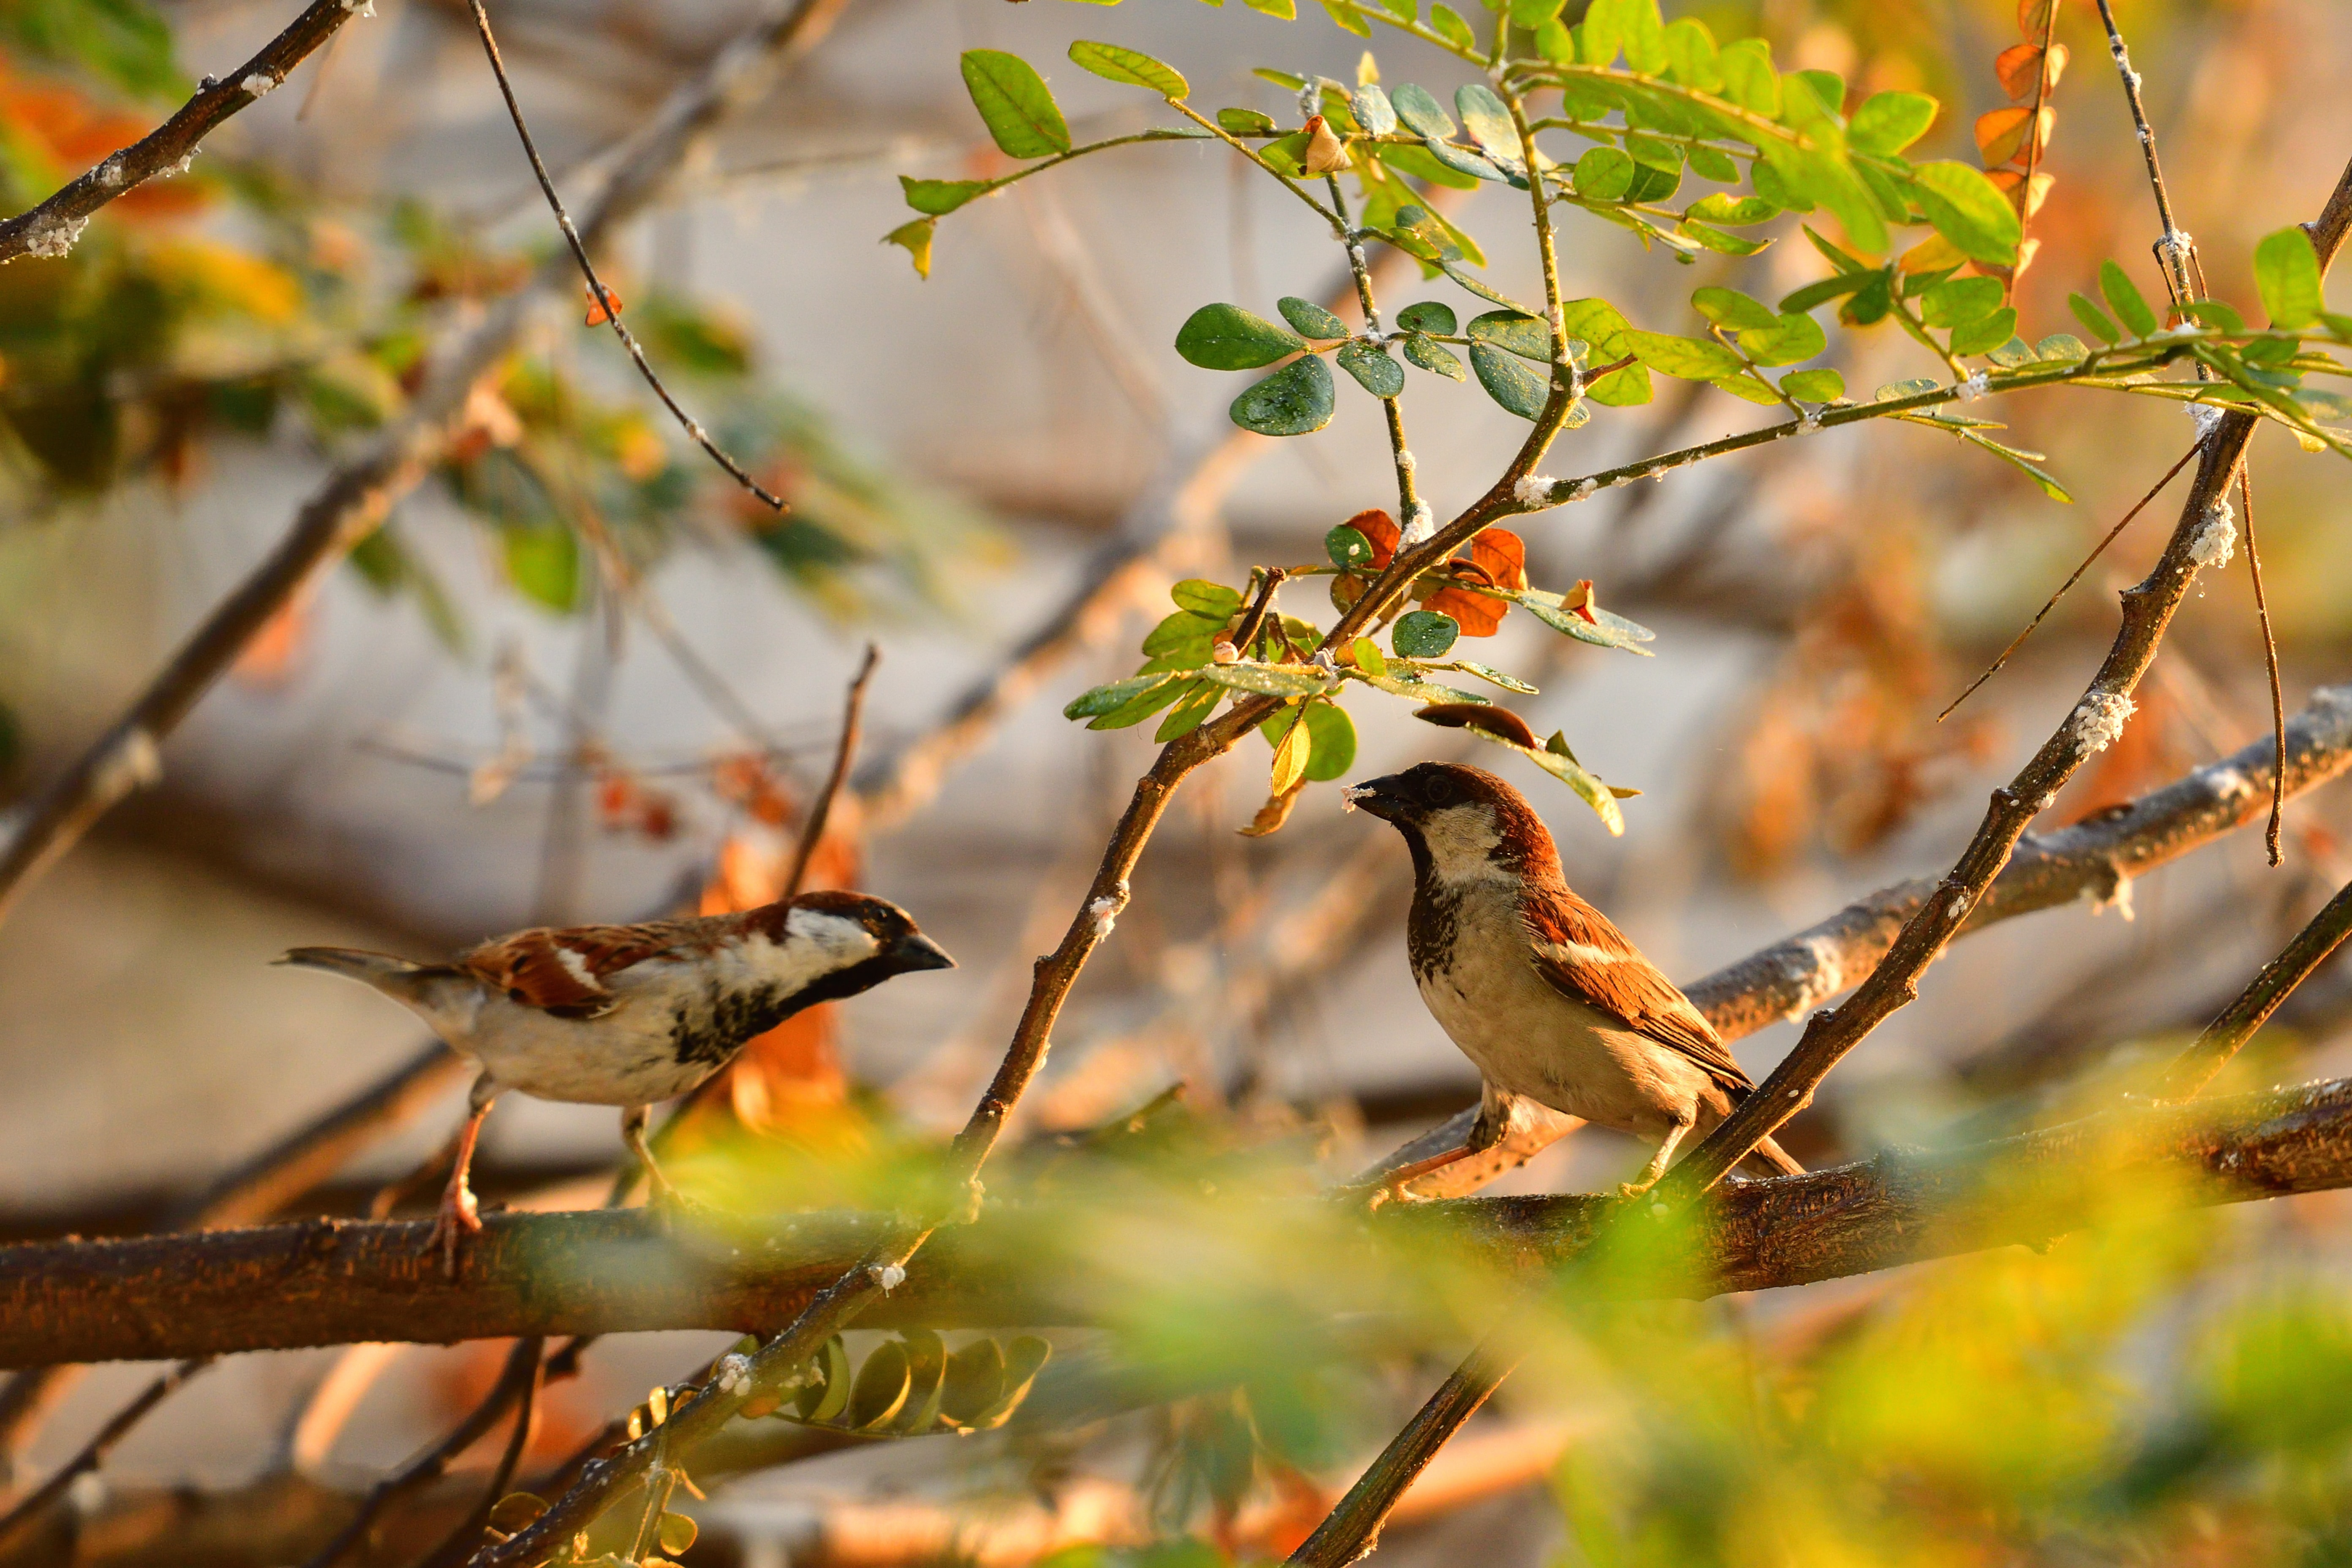 Imagine waking up to the soothing sounds of birds chirping in the distance, surrounded by nature.